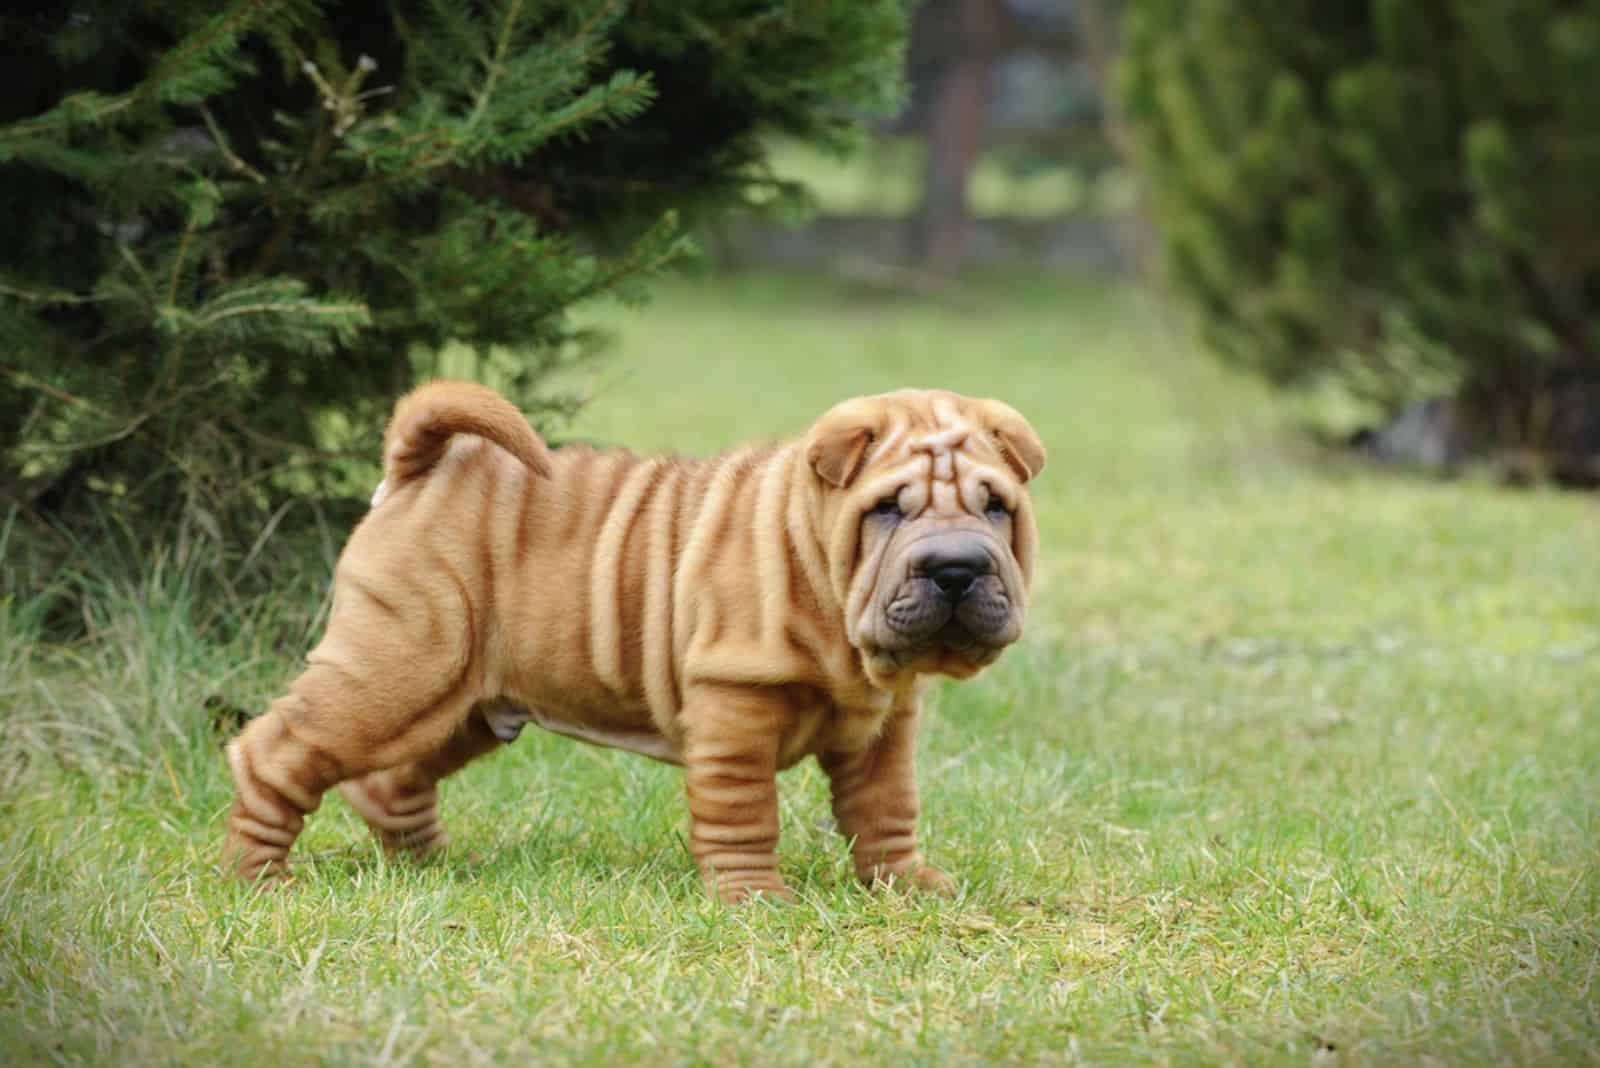 Shar pei puppy in the park standing